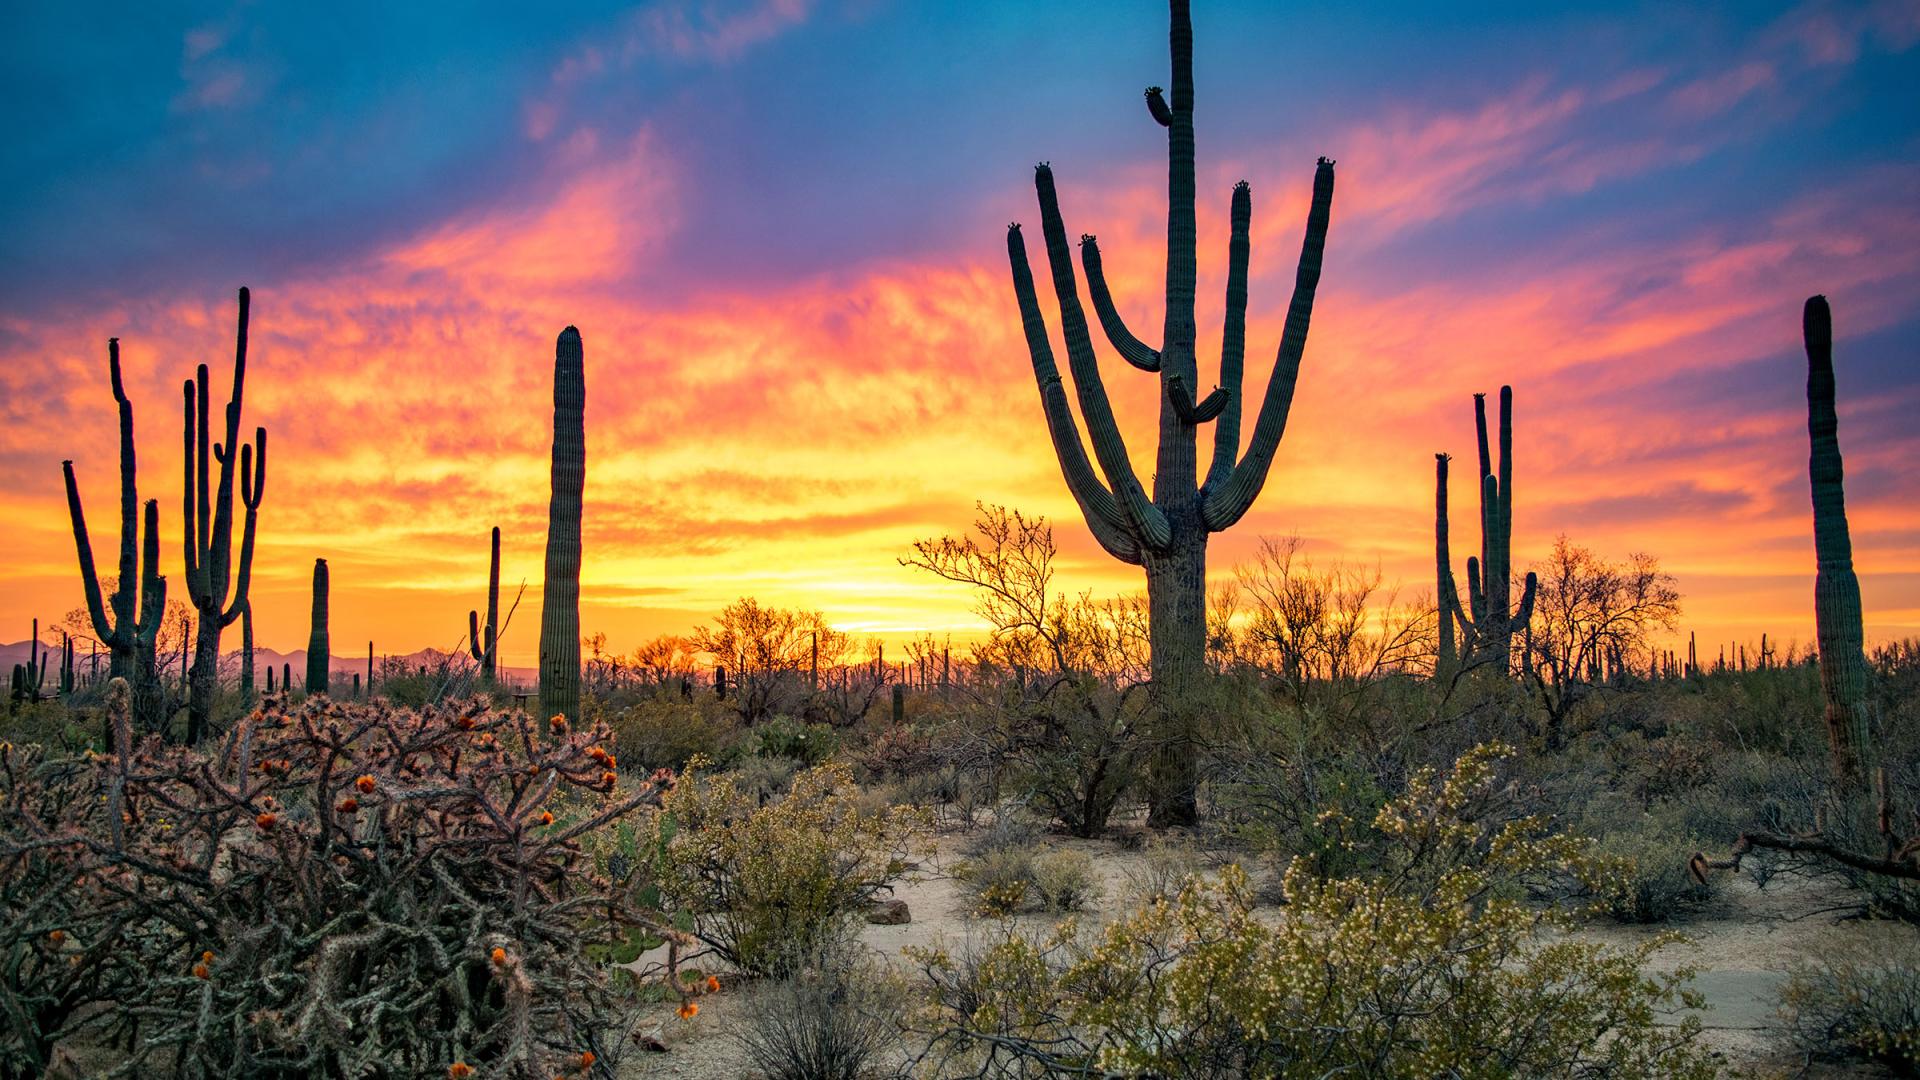 A dramatic sunset paints the sky in yellows, pinks, and blues as a backdrop to Saguaro National Park and its namesake cactus. Photo by Nate Hovee.